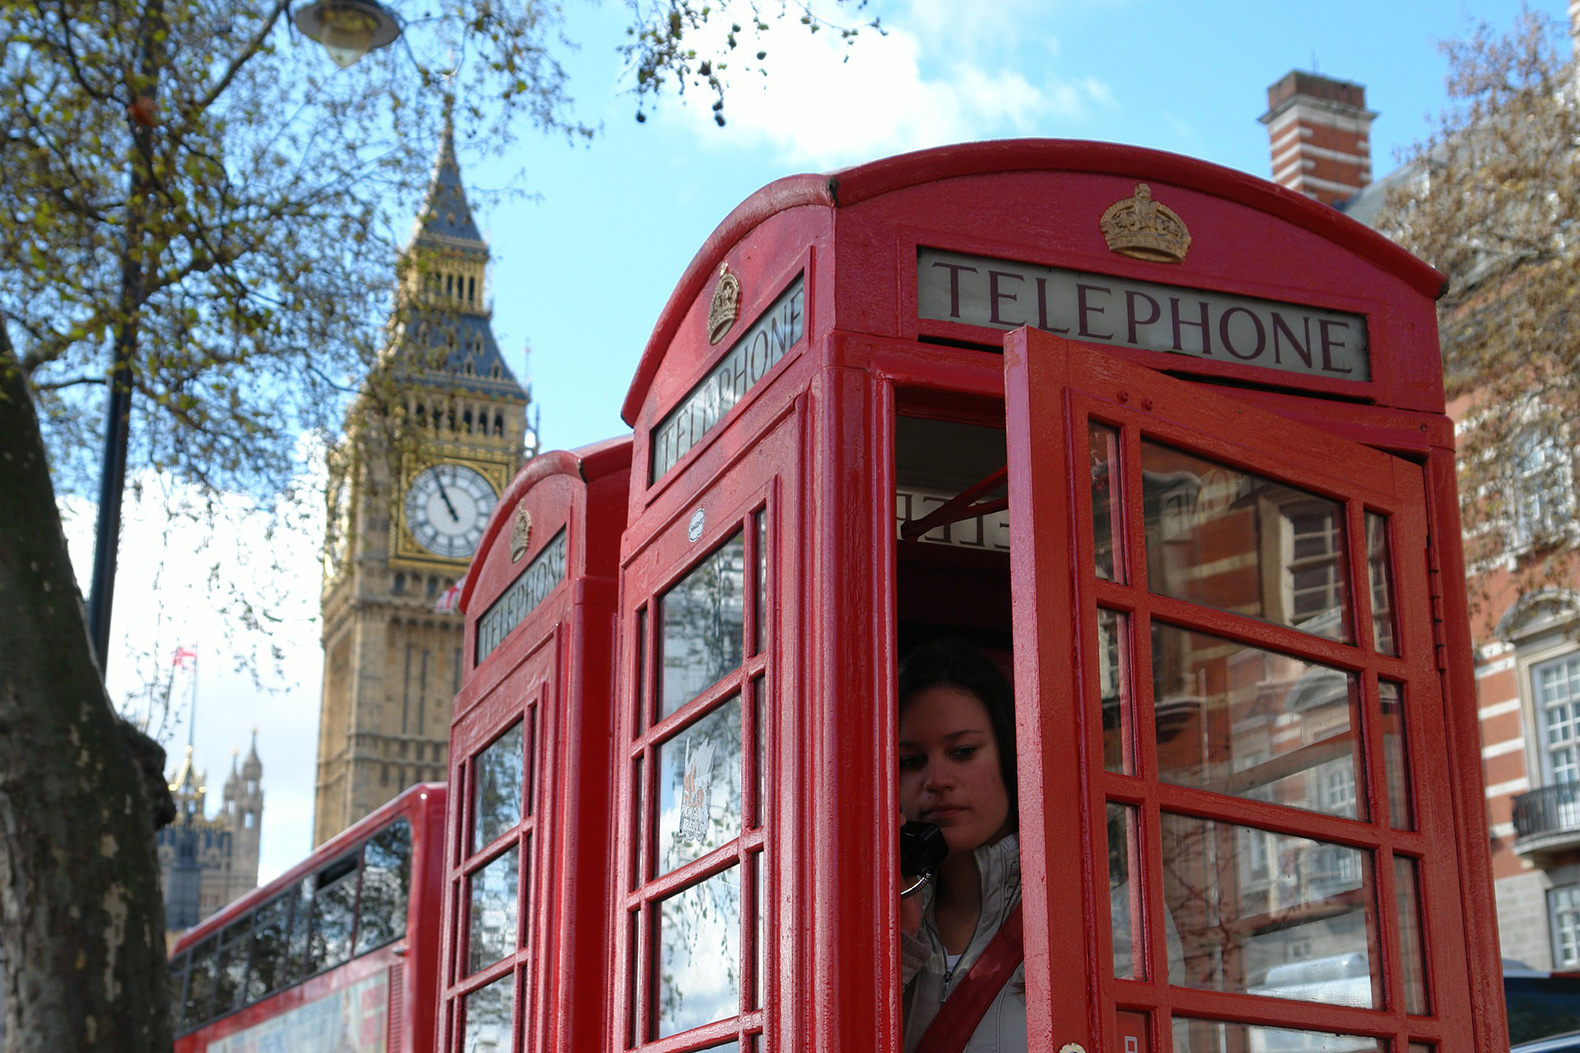 Woman on the phone inside a red UK telephone box, Big Ben in background